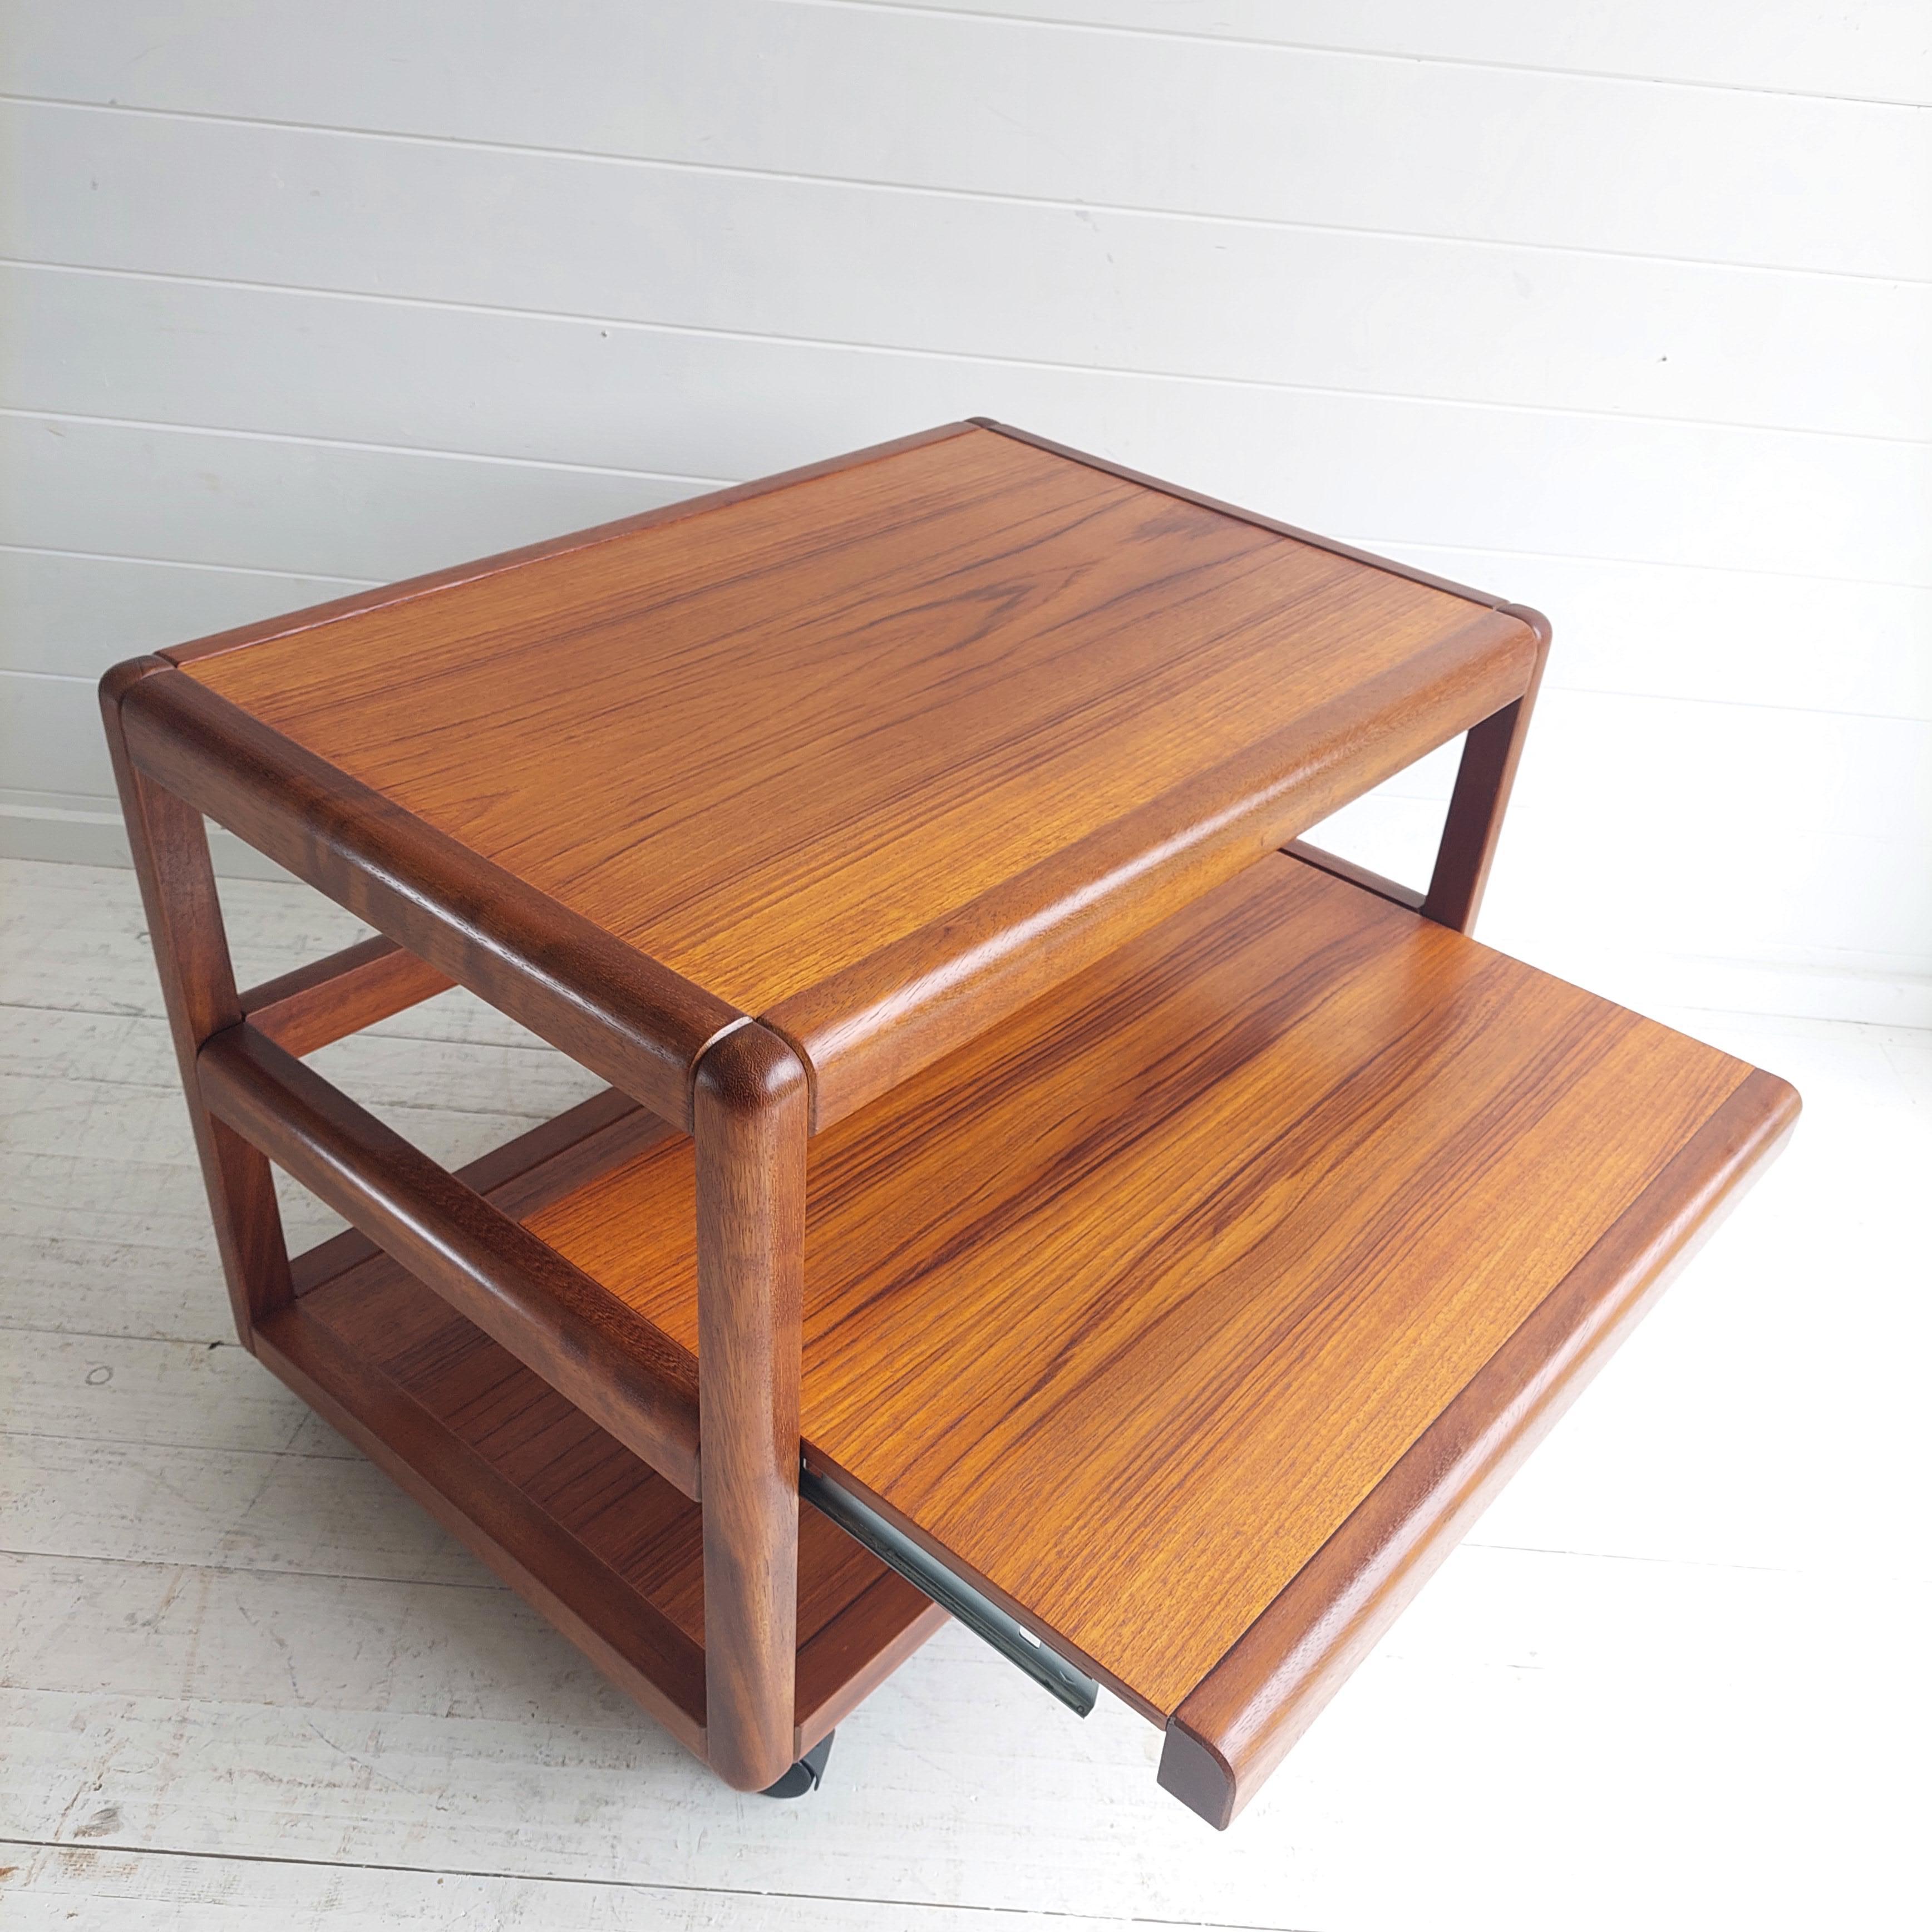 Mid Century teak serving trolly.
Stamped and Manufactured in Denmark
Charming and functional a vintage 3 Tier serving trolley 1960 - 1970s'.
Salin 5800 Nyborg style
Restored

The striking angled afromosia frame and legs support 3 tiers of teak